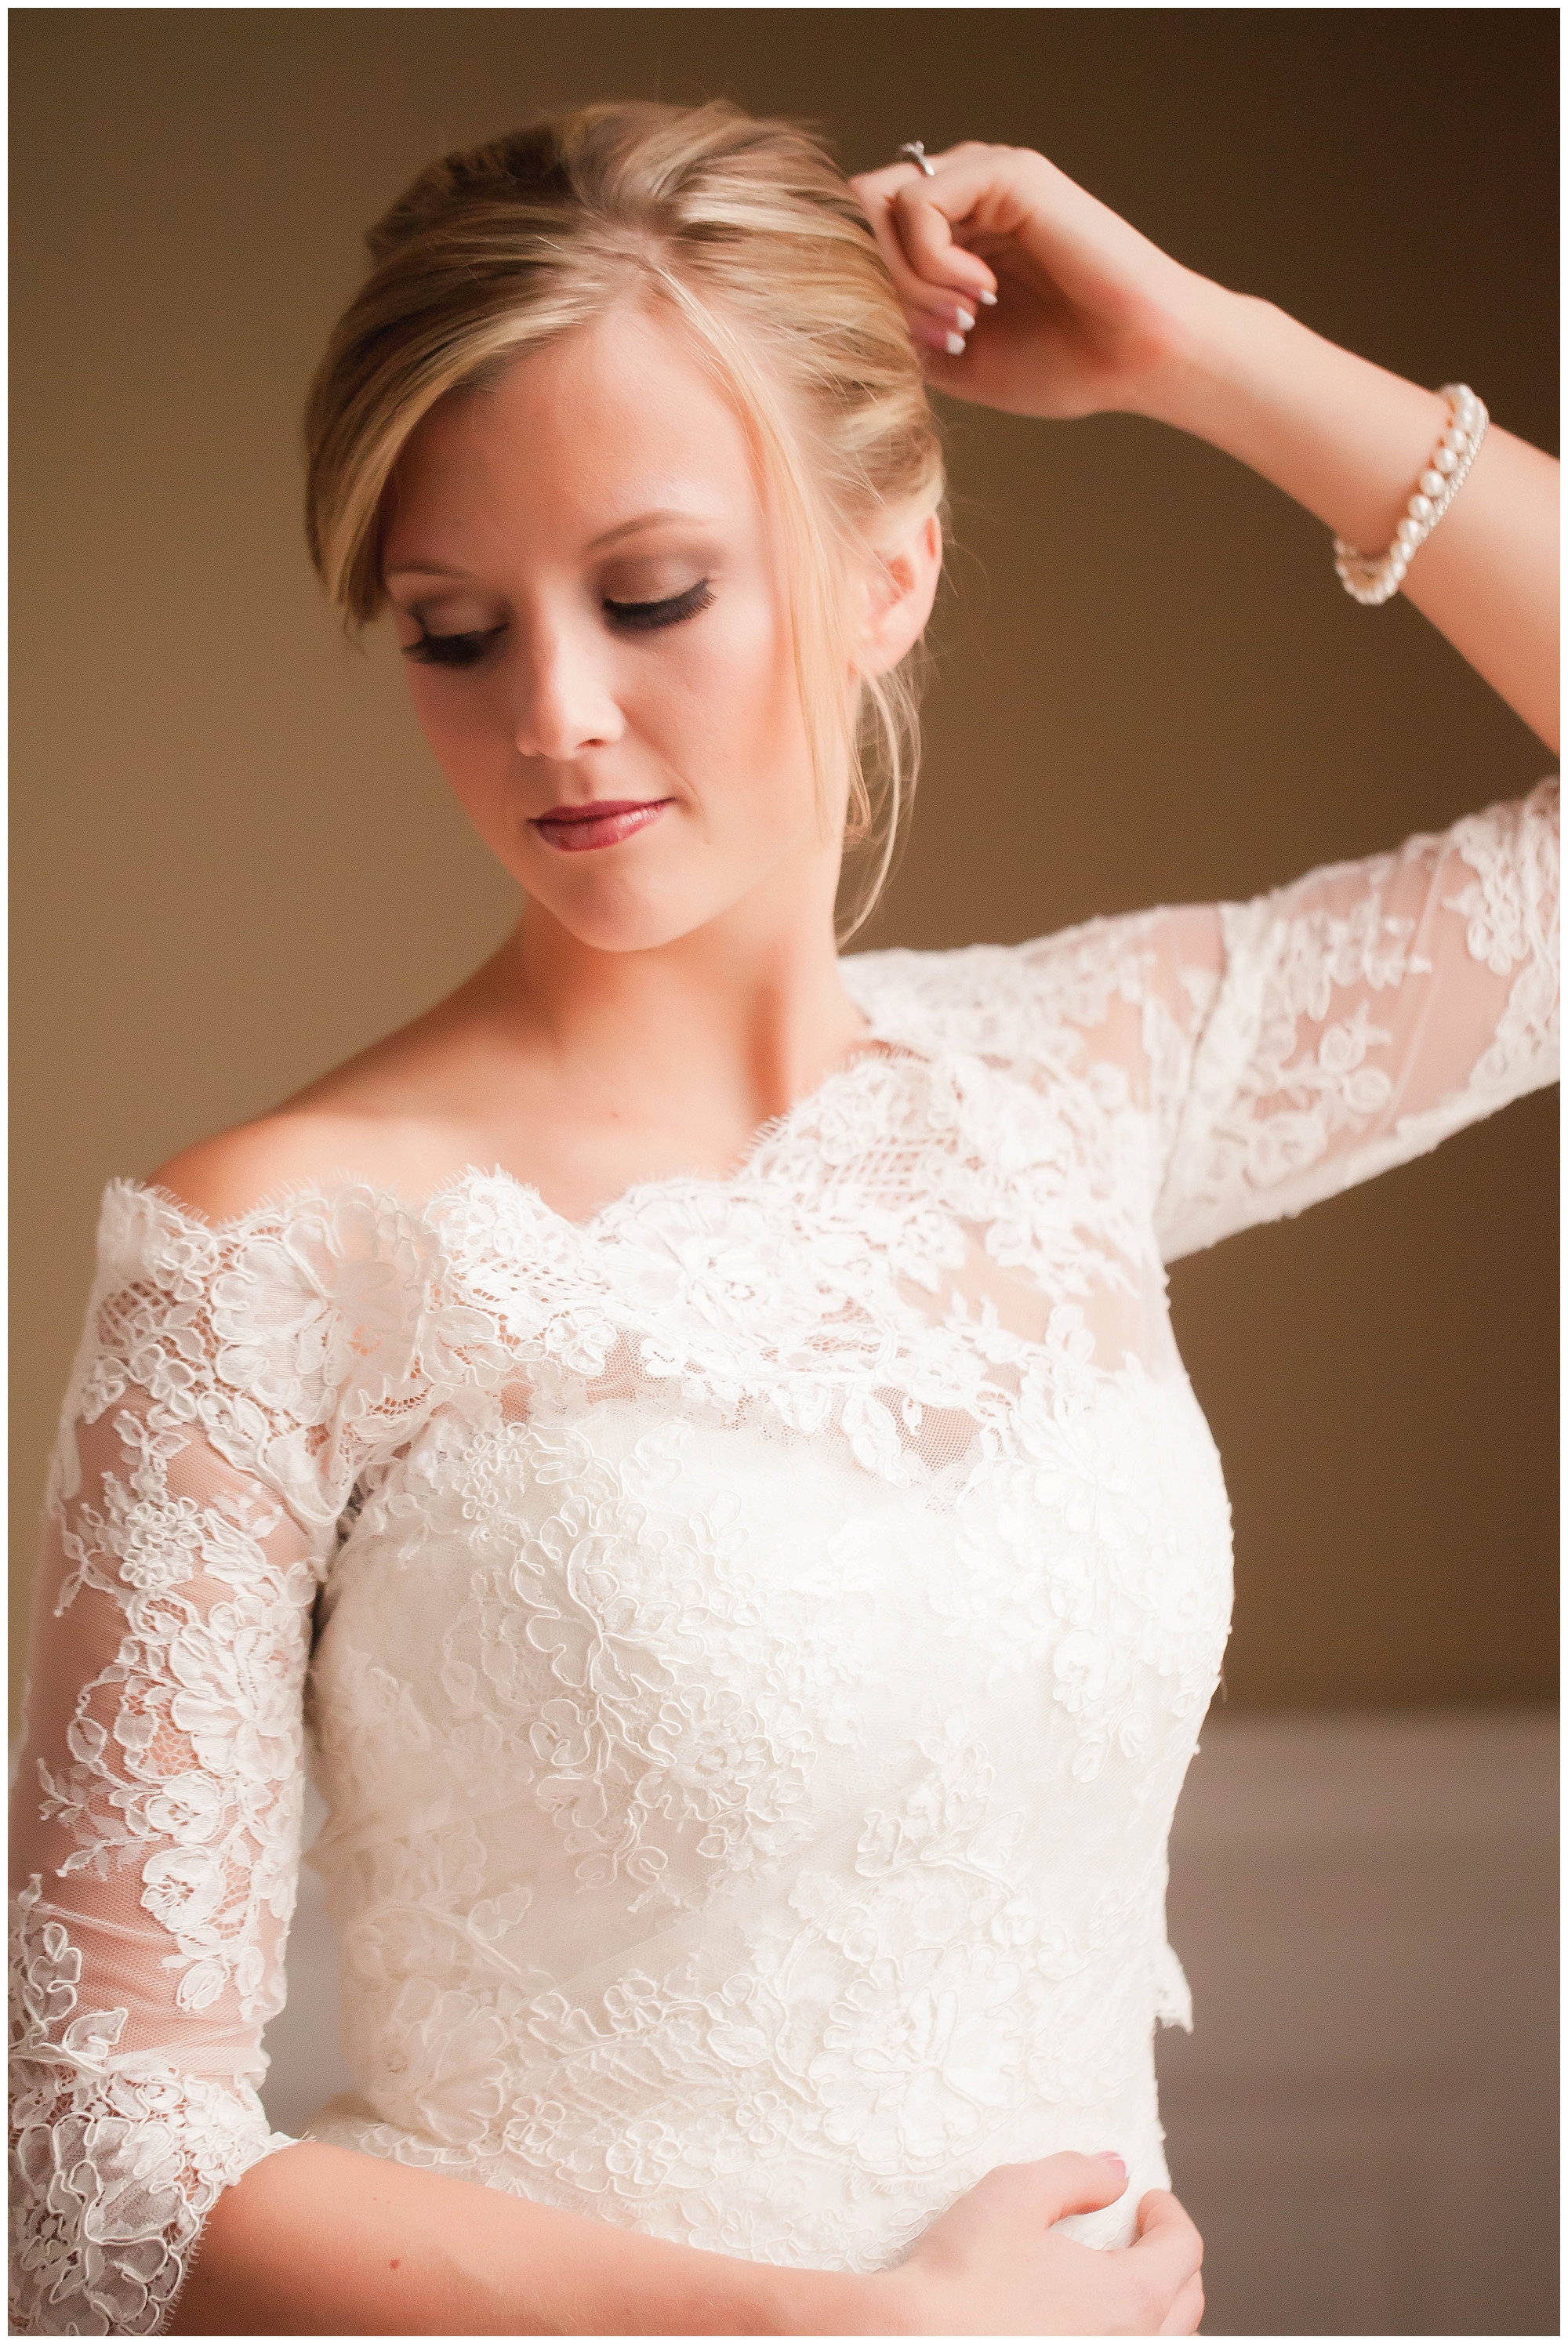 View More: http://caseyhphotos.pass.us/reagansbridals